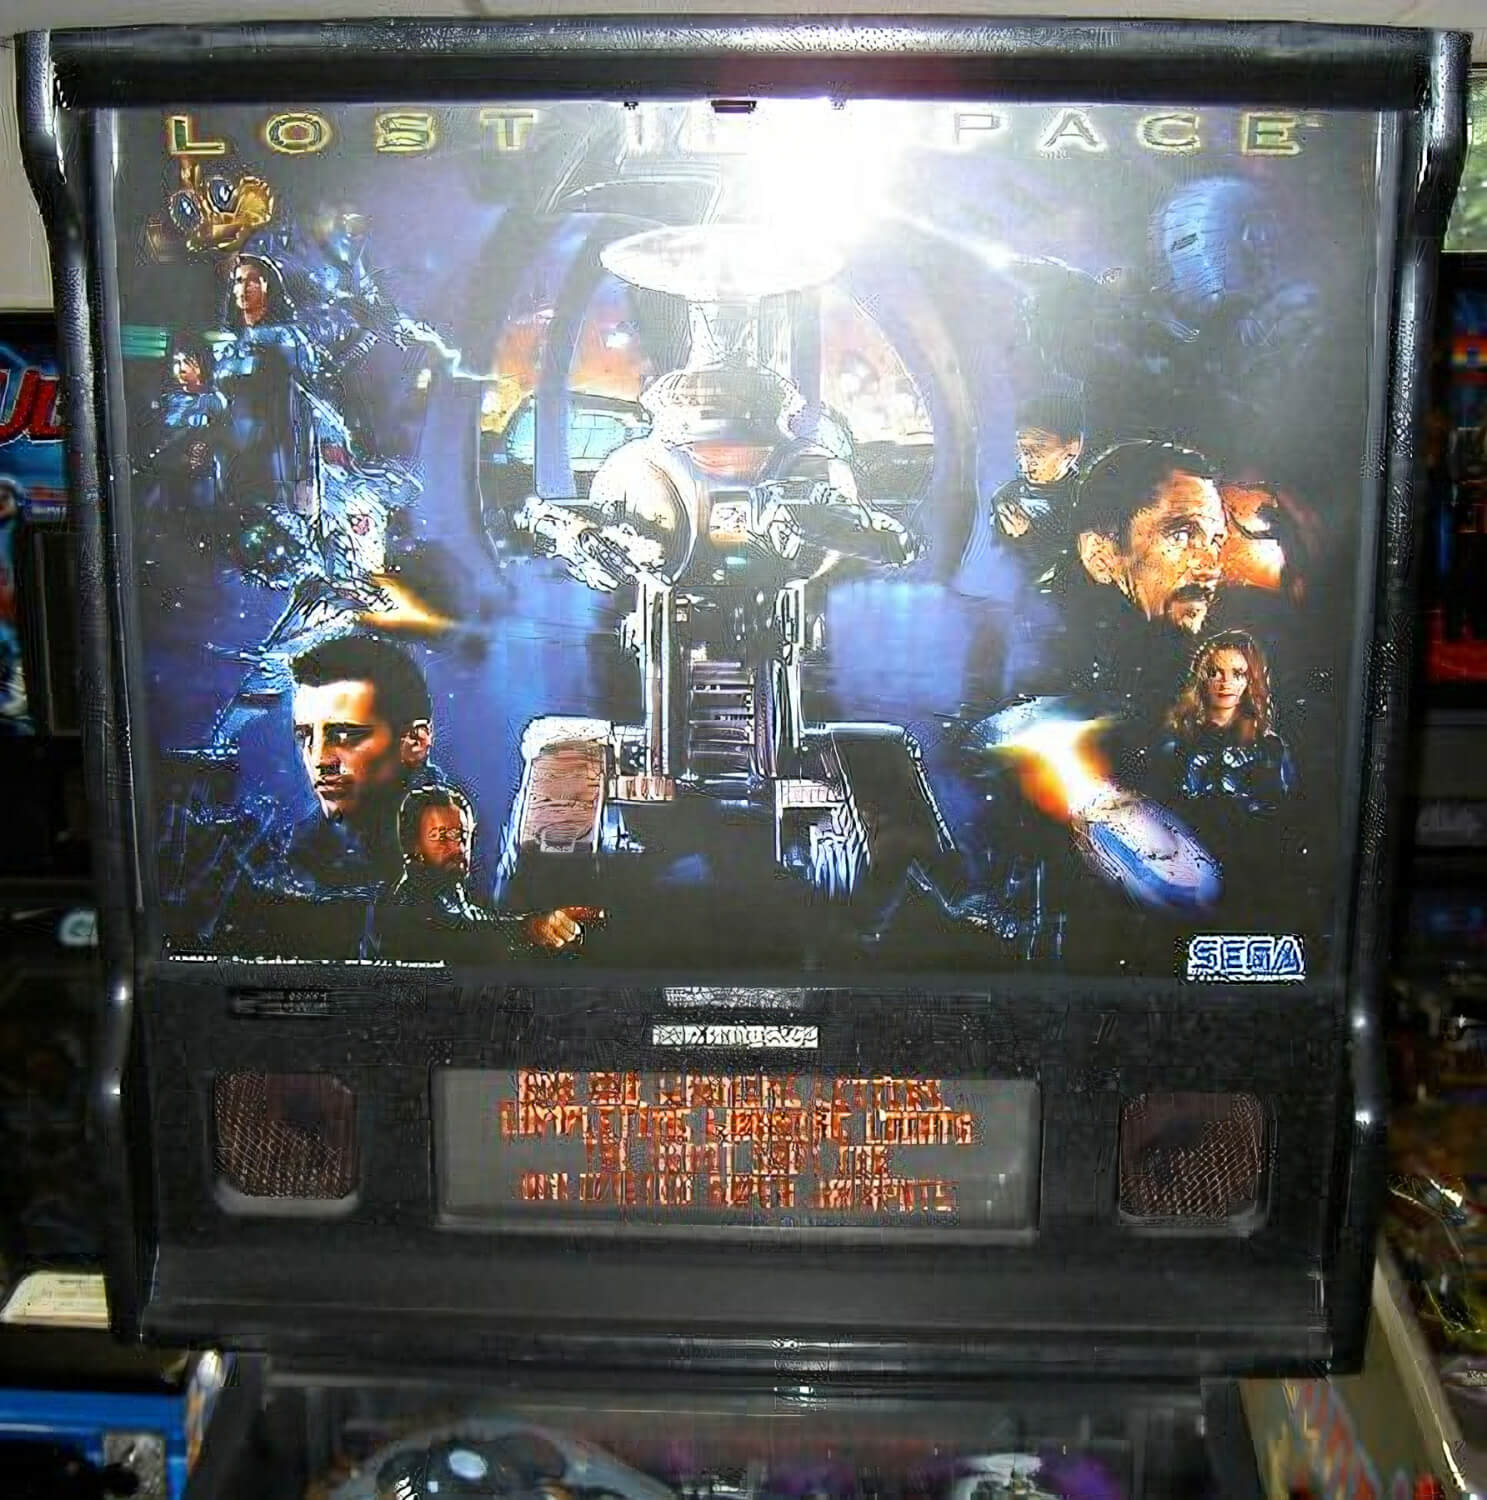 Lost In Space Pinball Machine For Sale